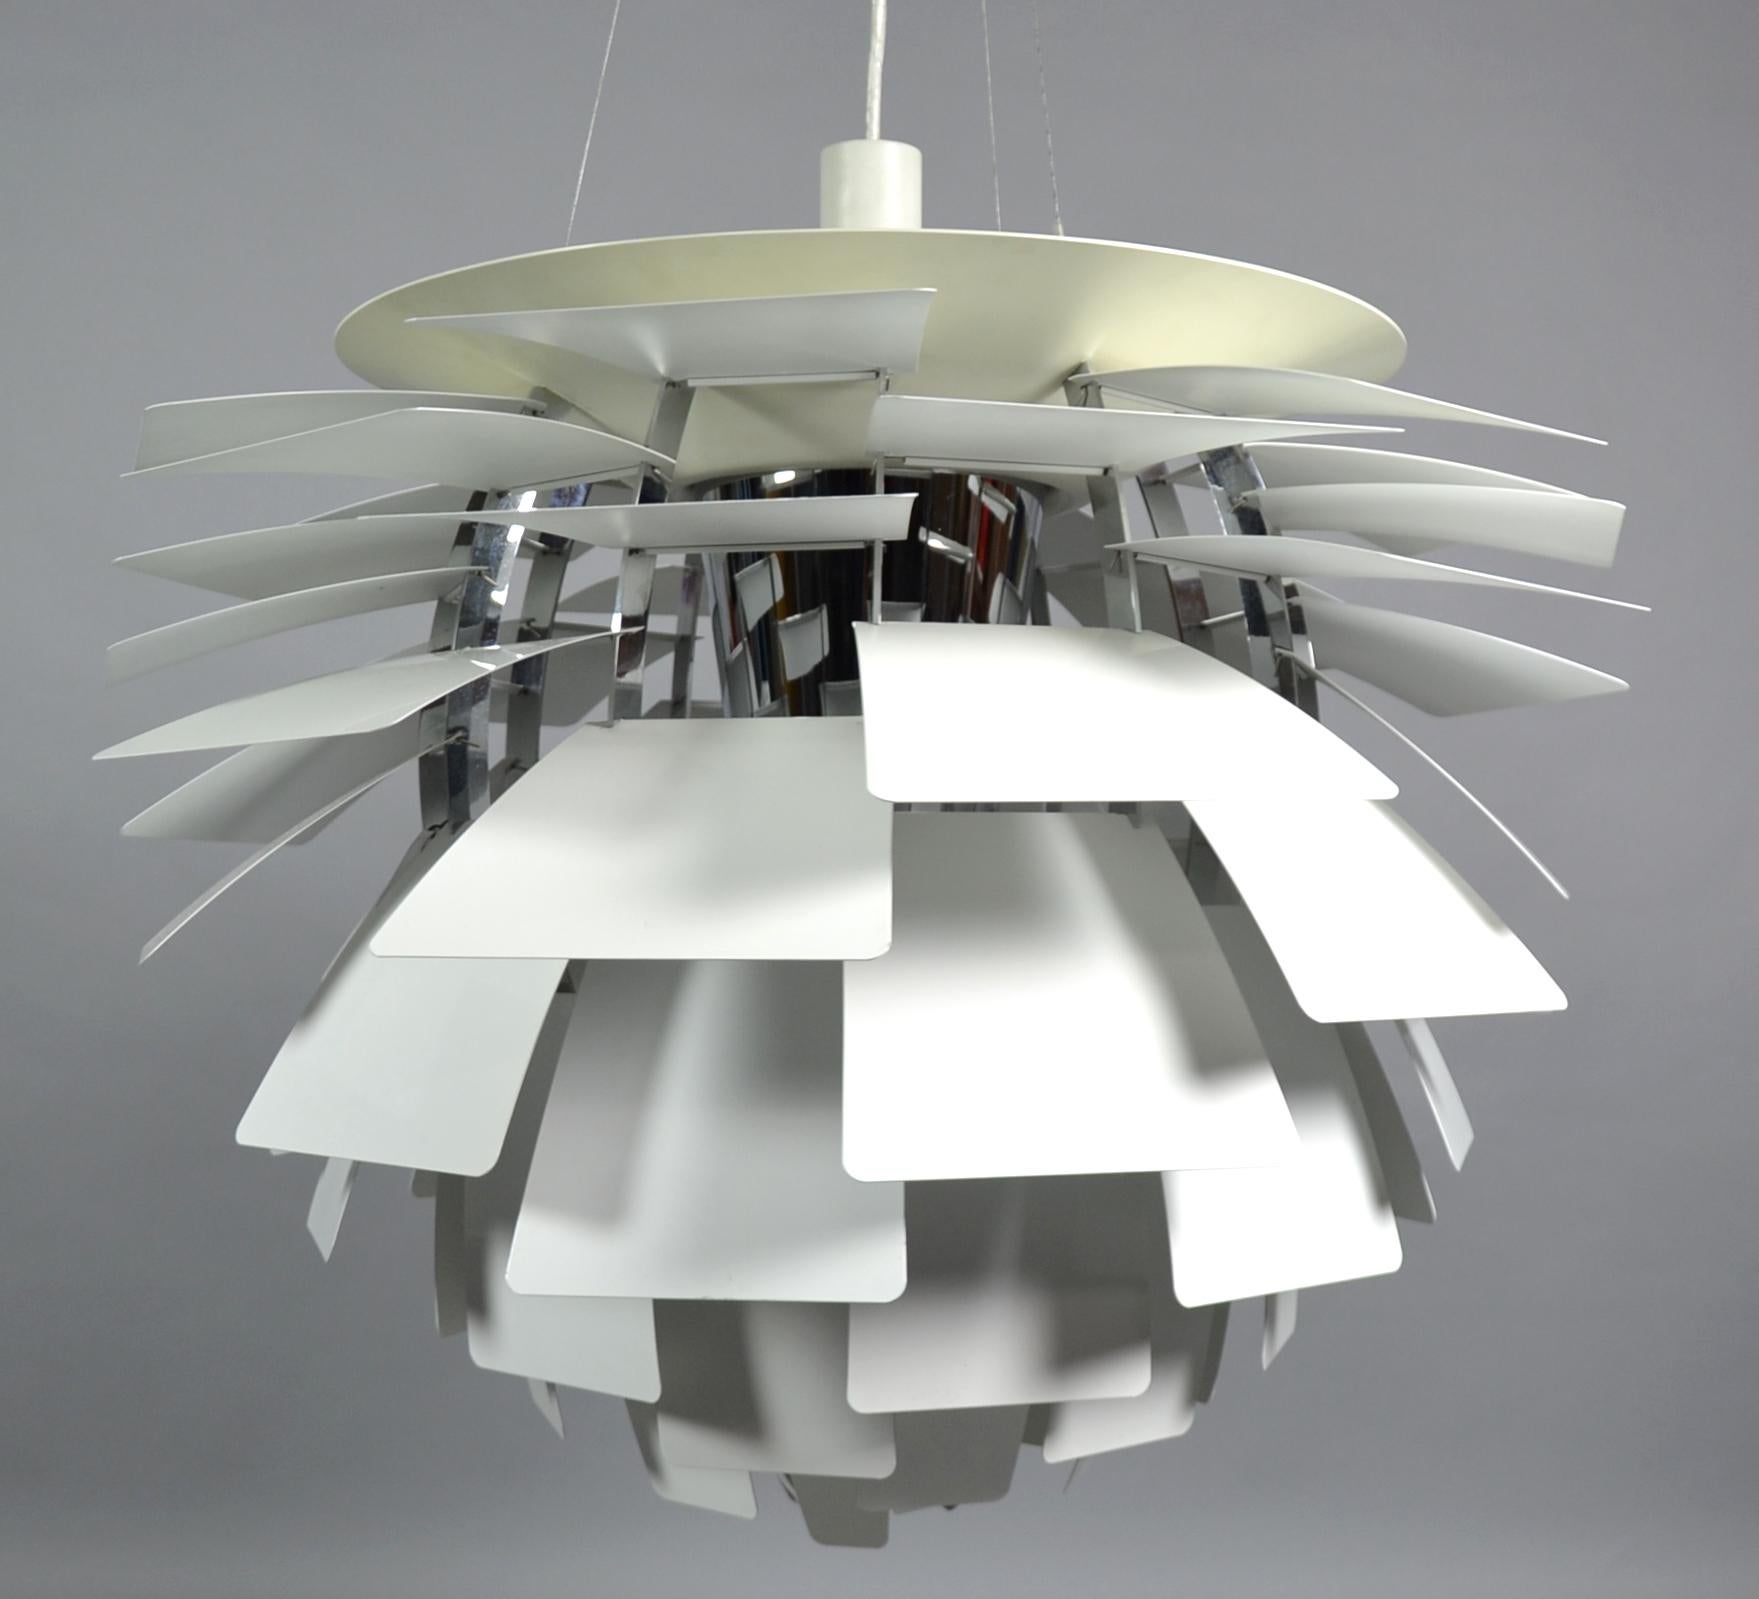 Design: Poul Henningsen
Design: from 1958
Manufacturer: Louis Poulsen
Condition: used
Model: PH Arichoke
Leaves inside and outside white painted metal.
The lamp hangs on three steel cables.
E40 socket for max 500 watt bulb.
A baldachin and a